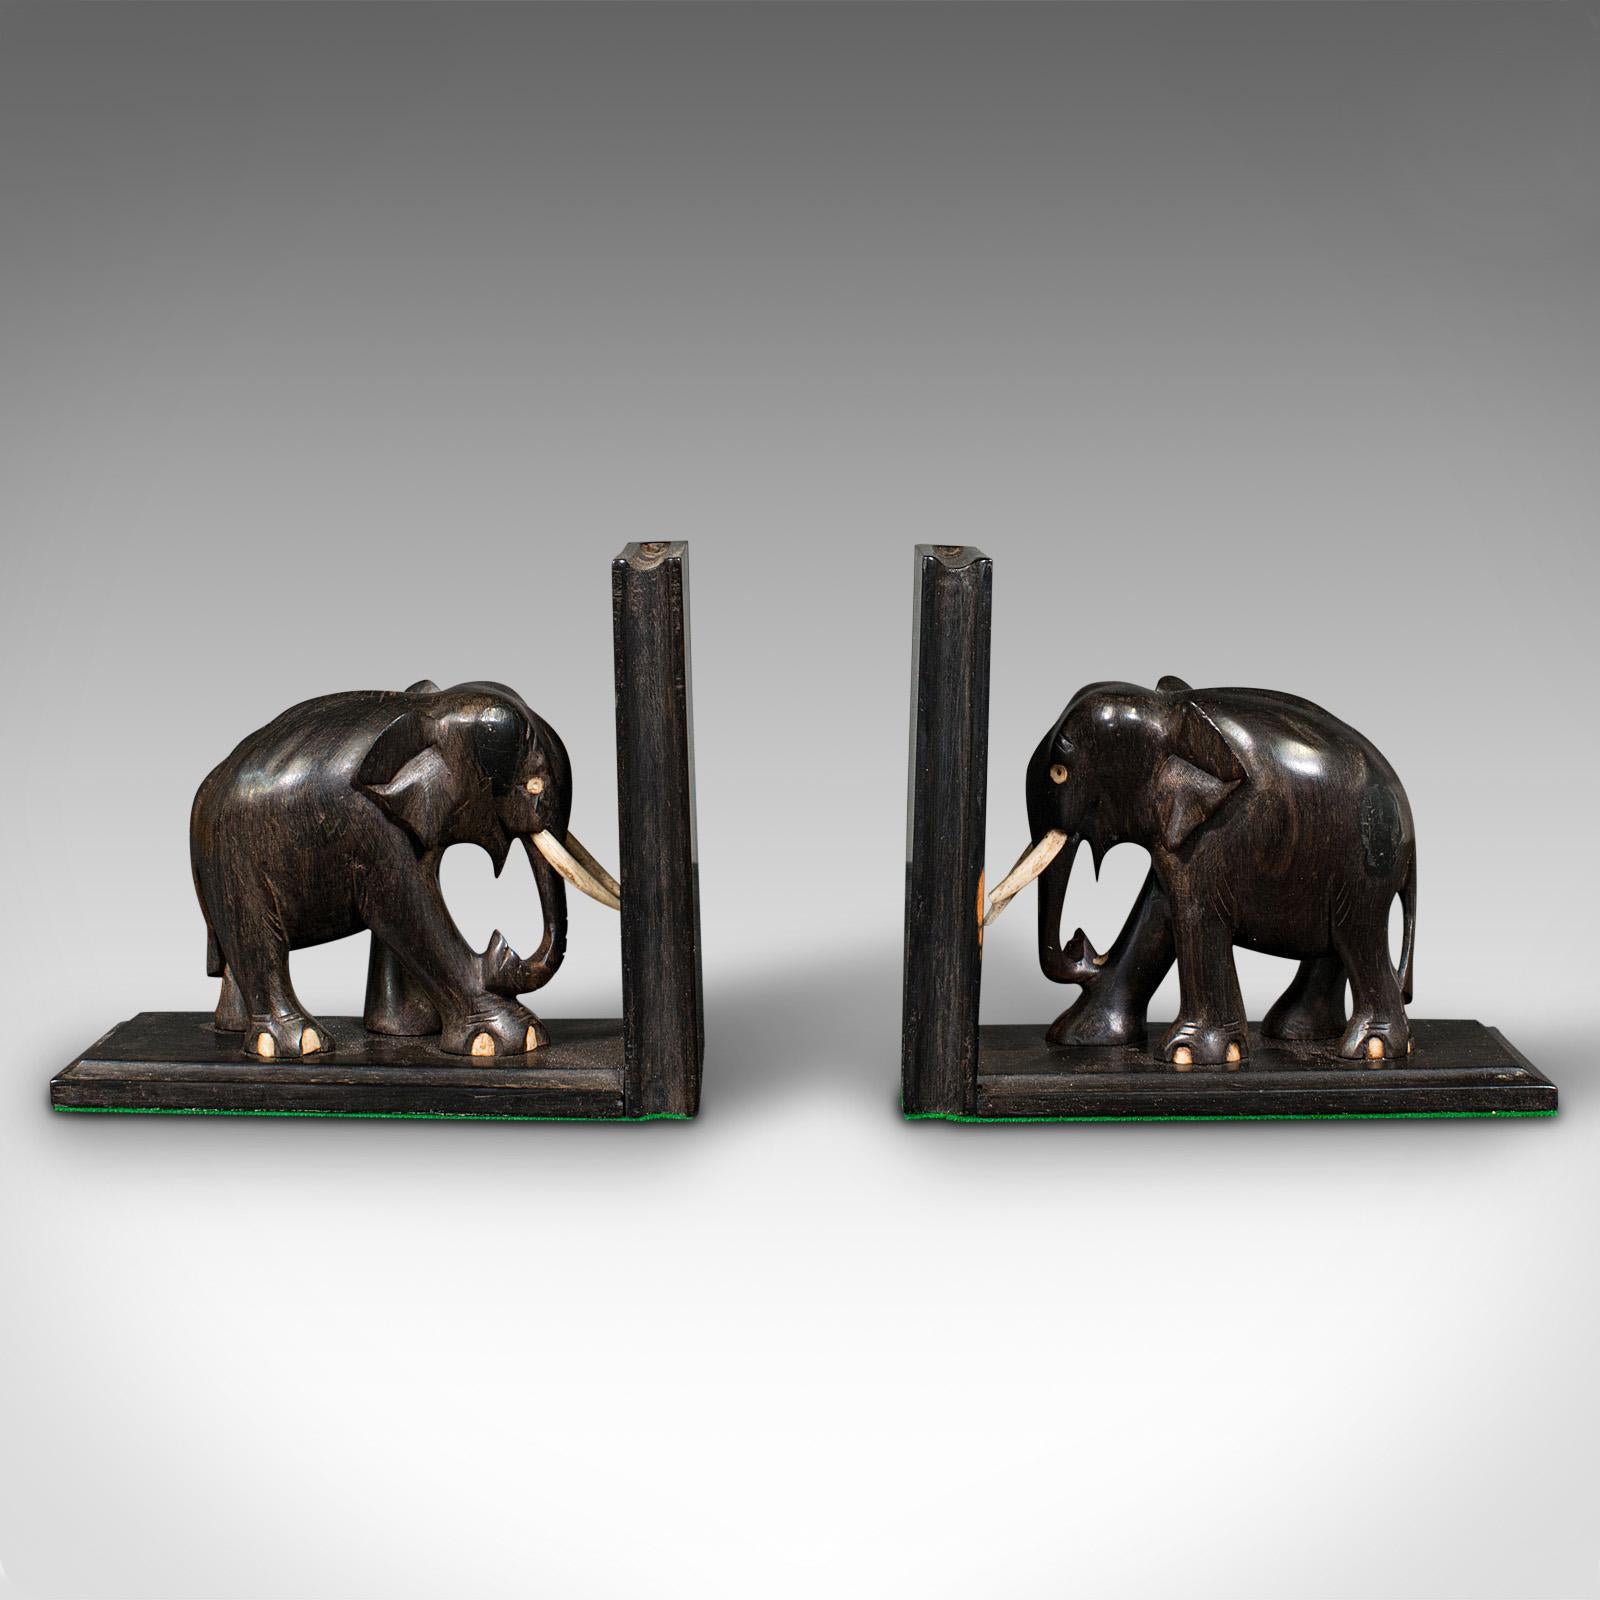 This is a pair of small antique elephant bookends. An Anglo-Indian, ebony and bone carved animal novel or book rest, dating to the late Victorian period, circa 1890.

Graced with copious character and appeal for the reader
Displaying a desirable